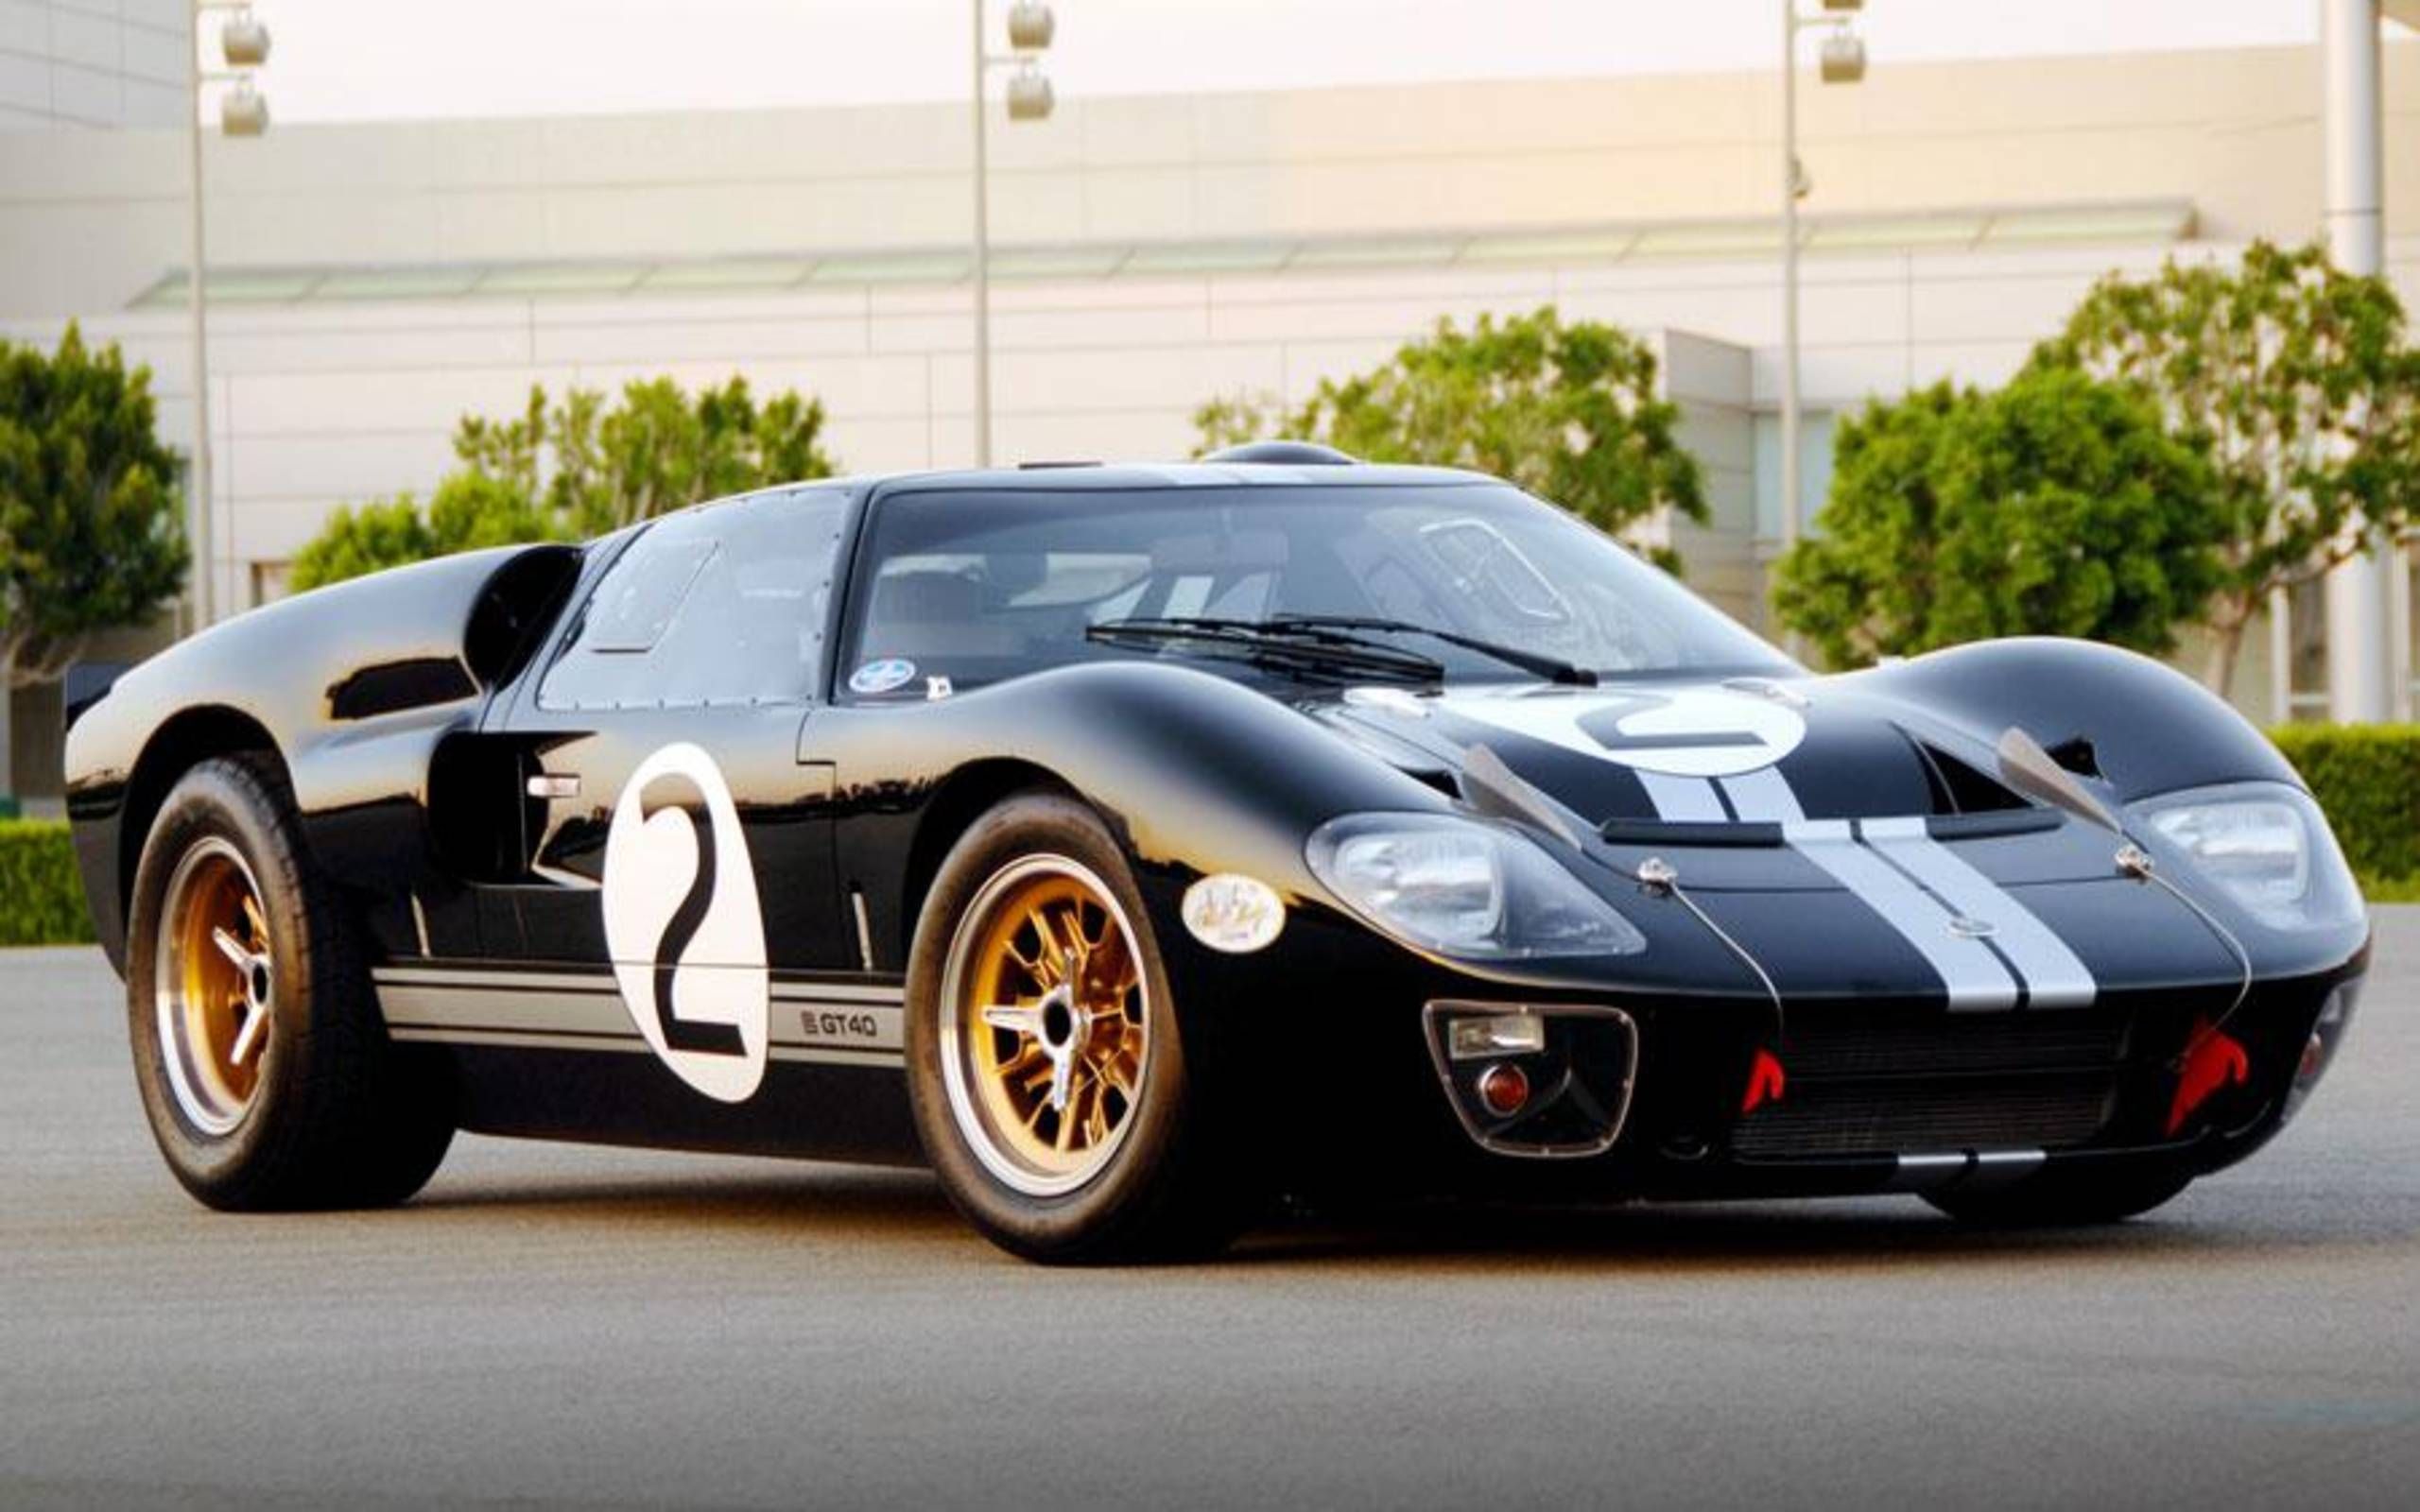 Shelby CS GT40: Super-performer does lap times at light speed